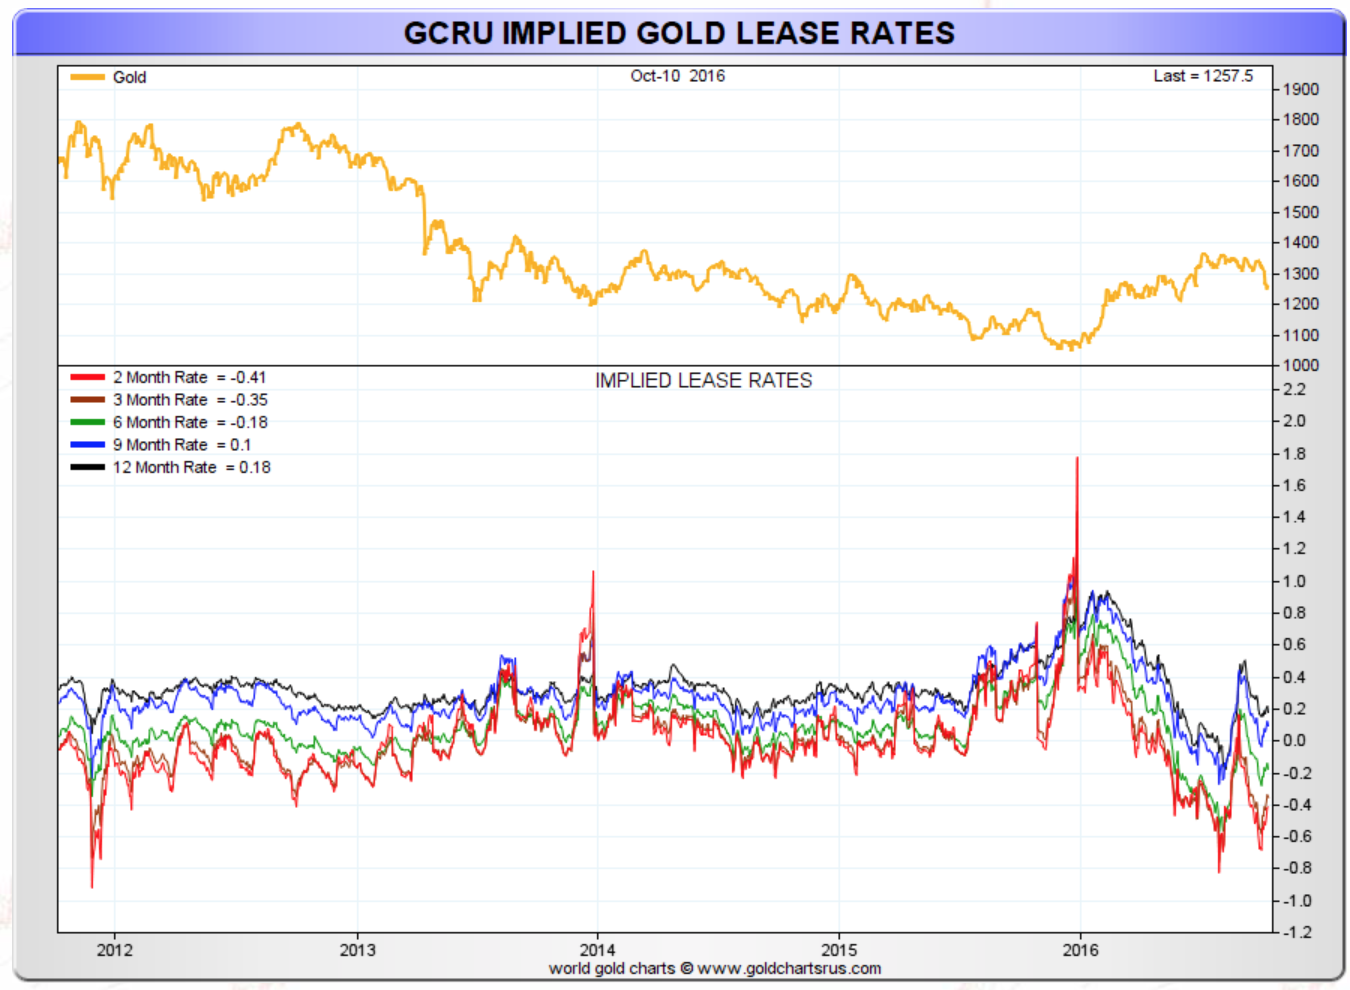 GCRU Implied Gold Lease Rates 